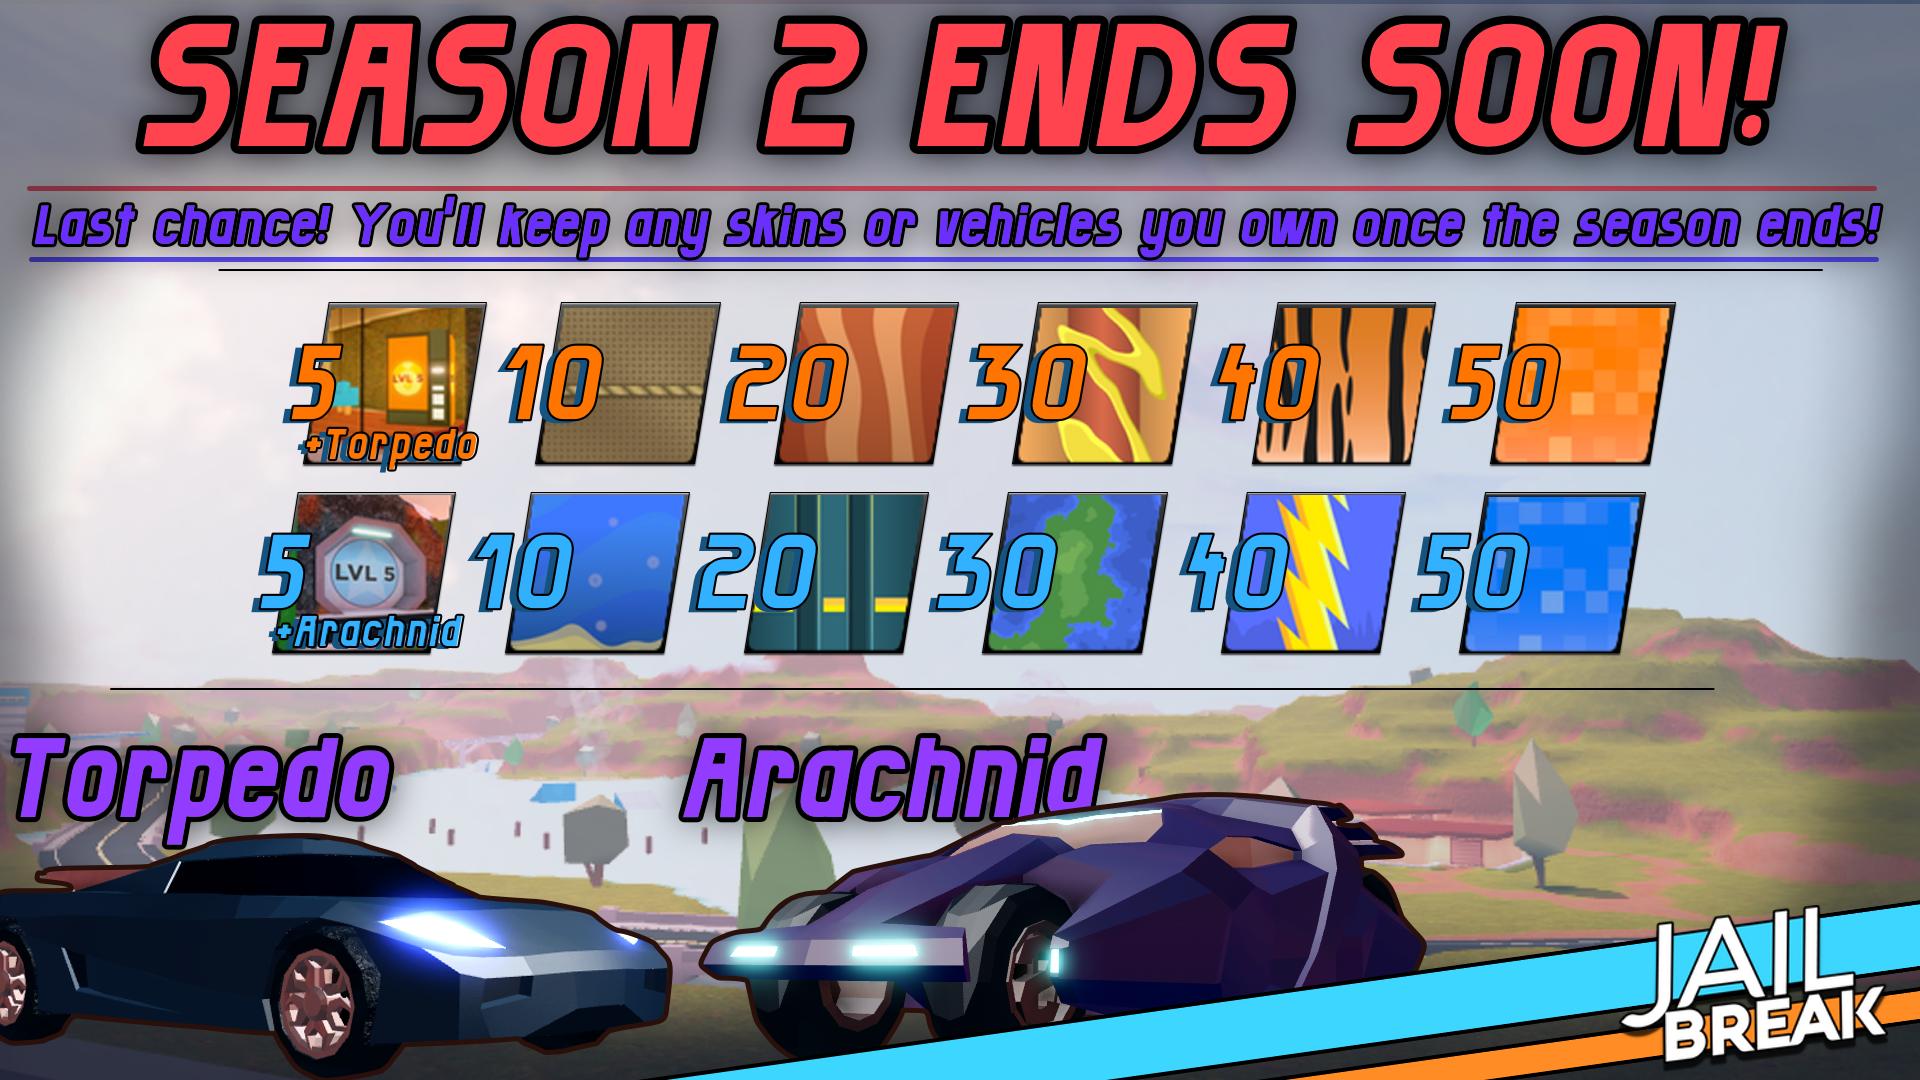 Badimo Jailbreak On Twitter Summer Is Here Next Week And So Is The Summer Season Of Jailbreak This Is Your Last Chance For Season 2 Items You Will Keep Any - roblox jailbreak where is the archnid